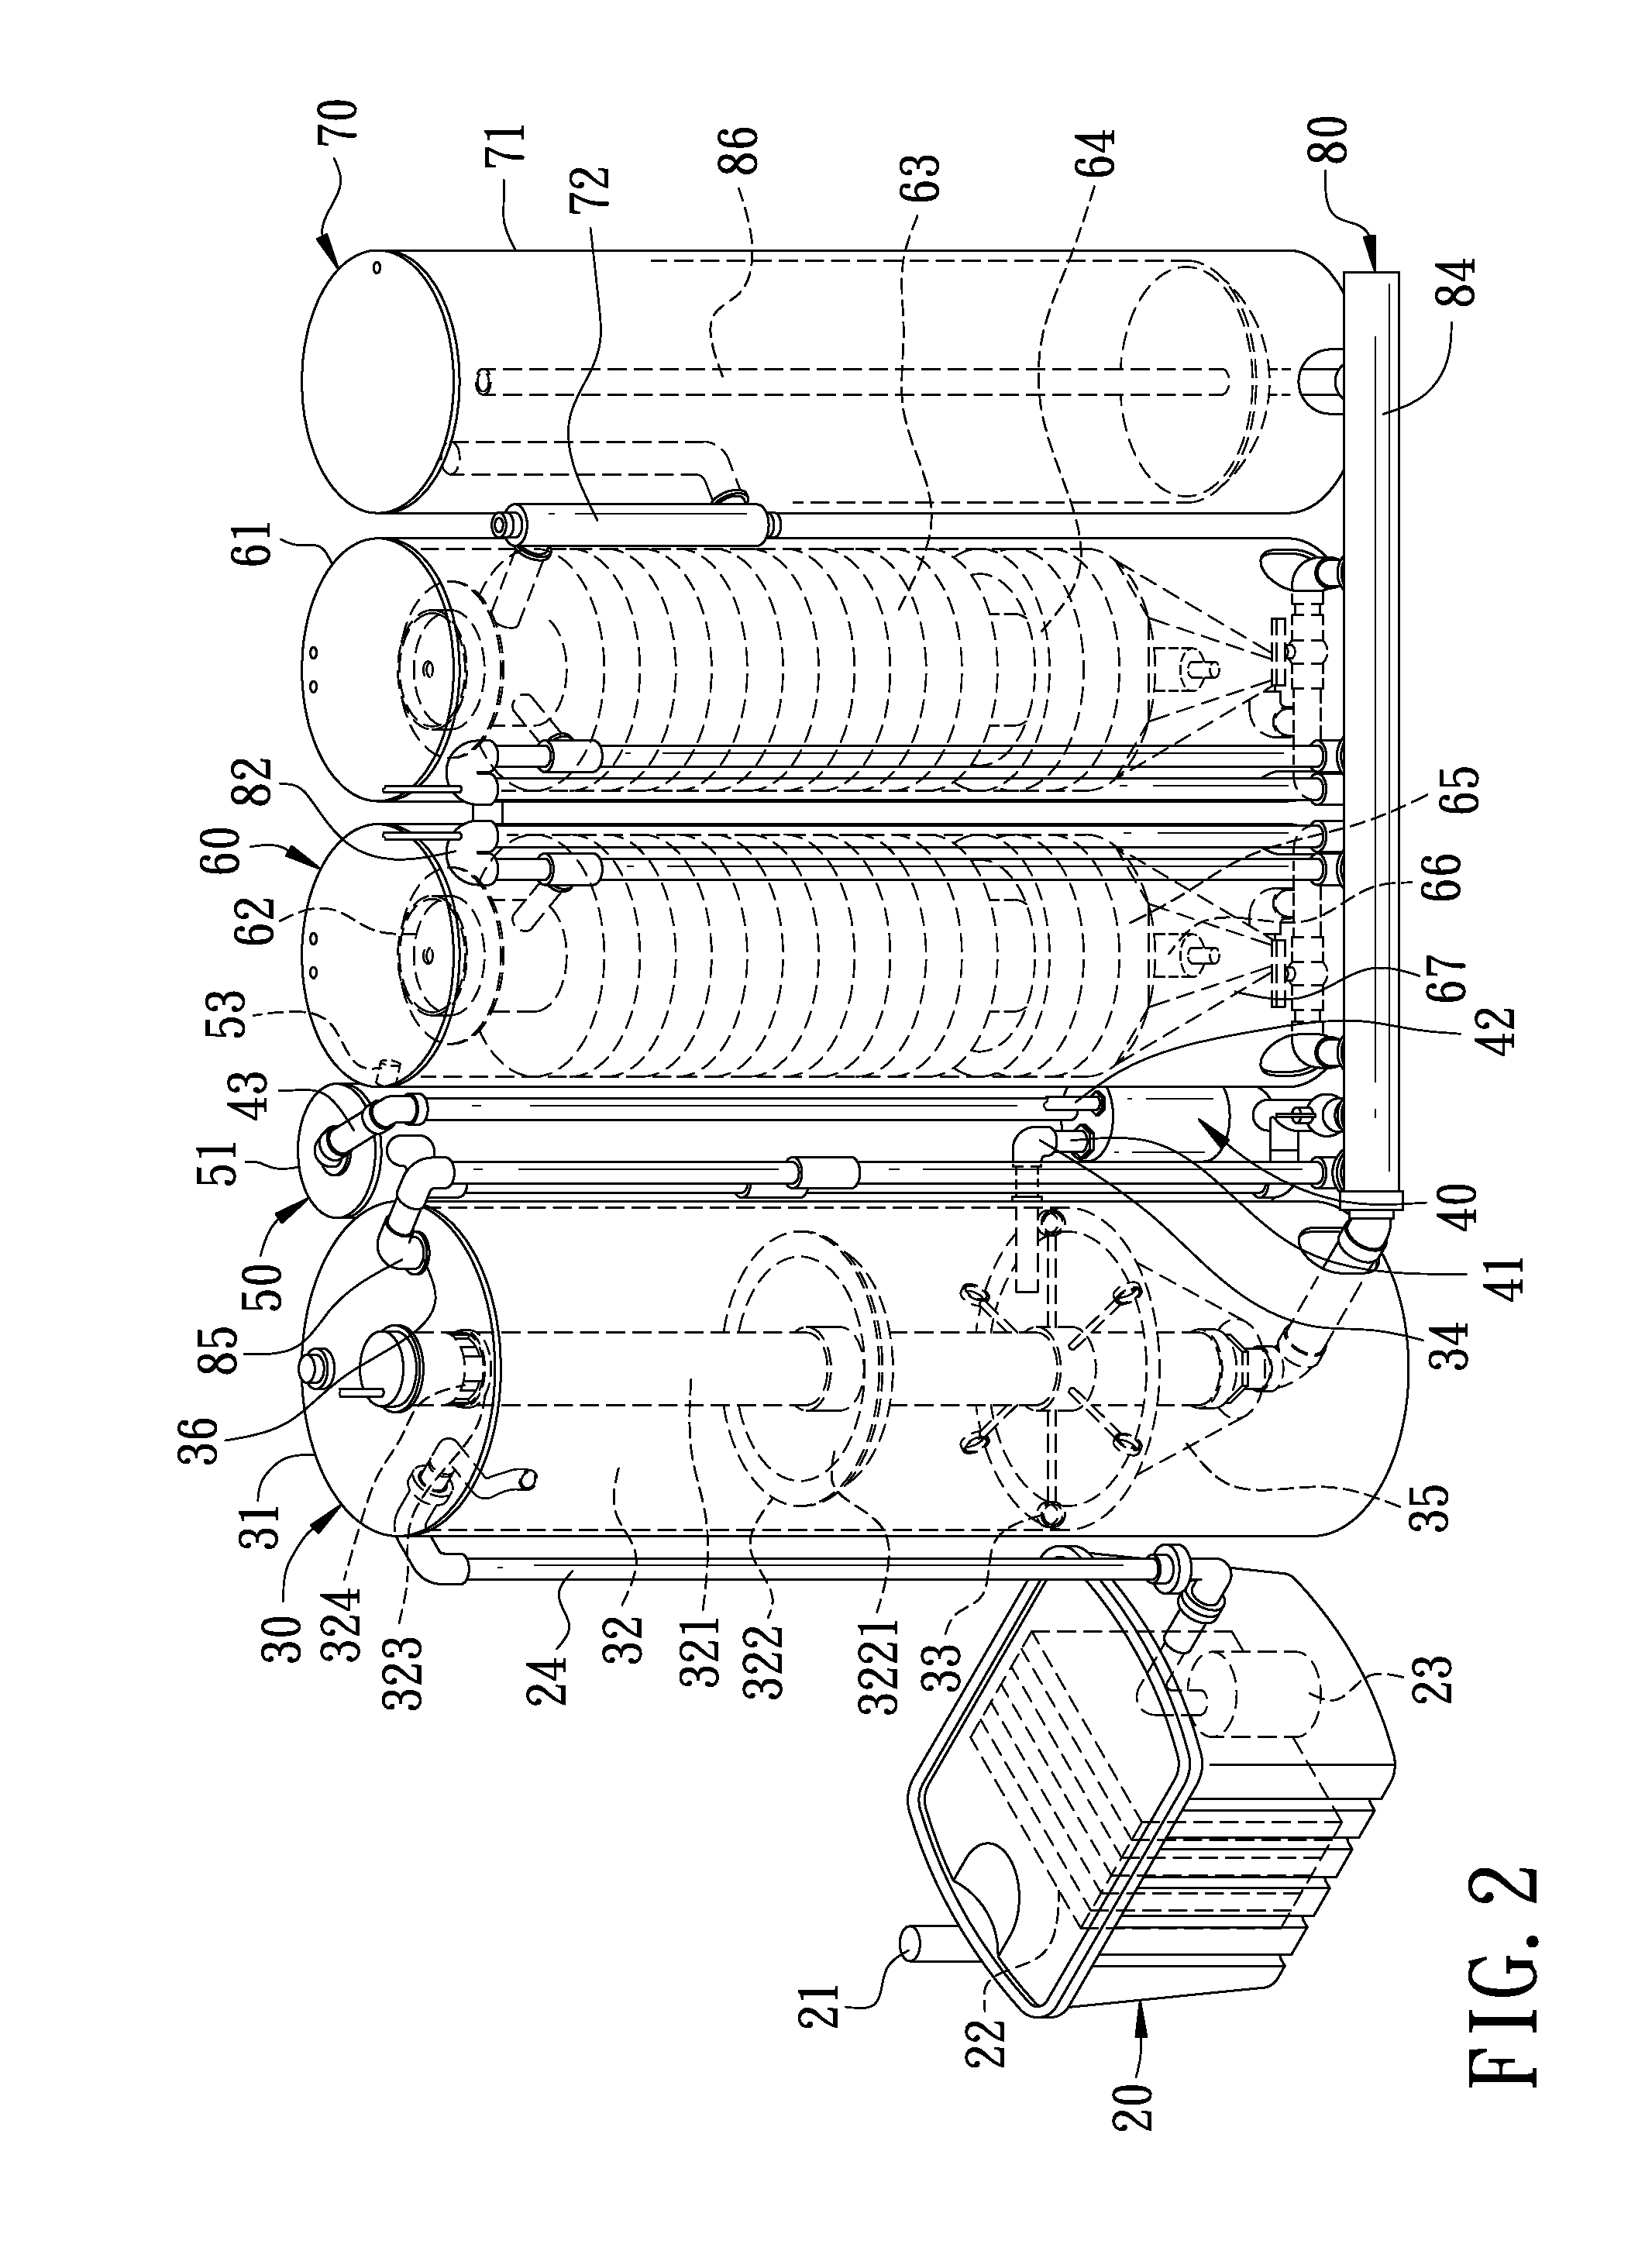 Waste water treatment apparatus